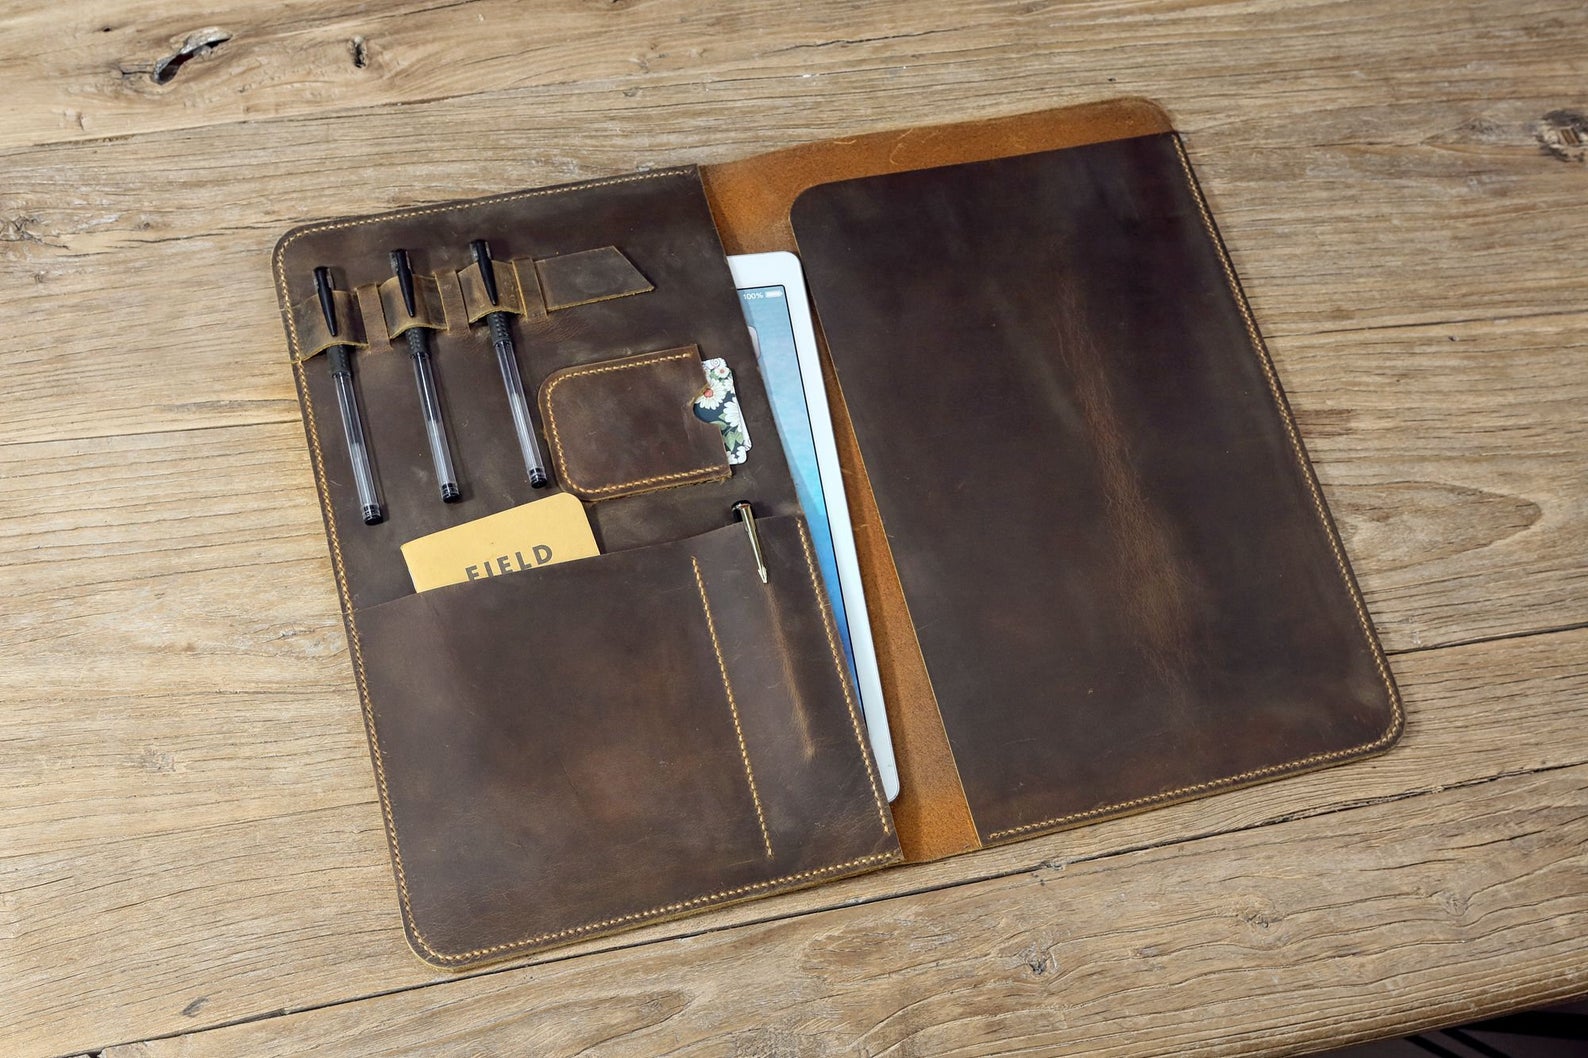 Personalized leather notebook journal refillable 5x8, legal pad